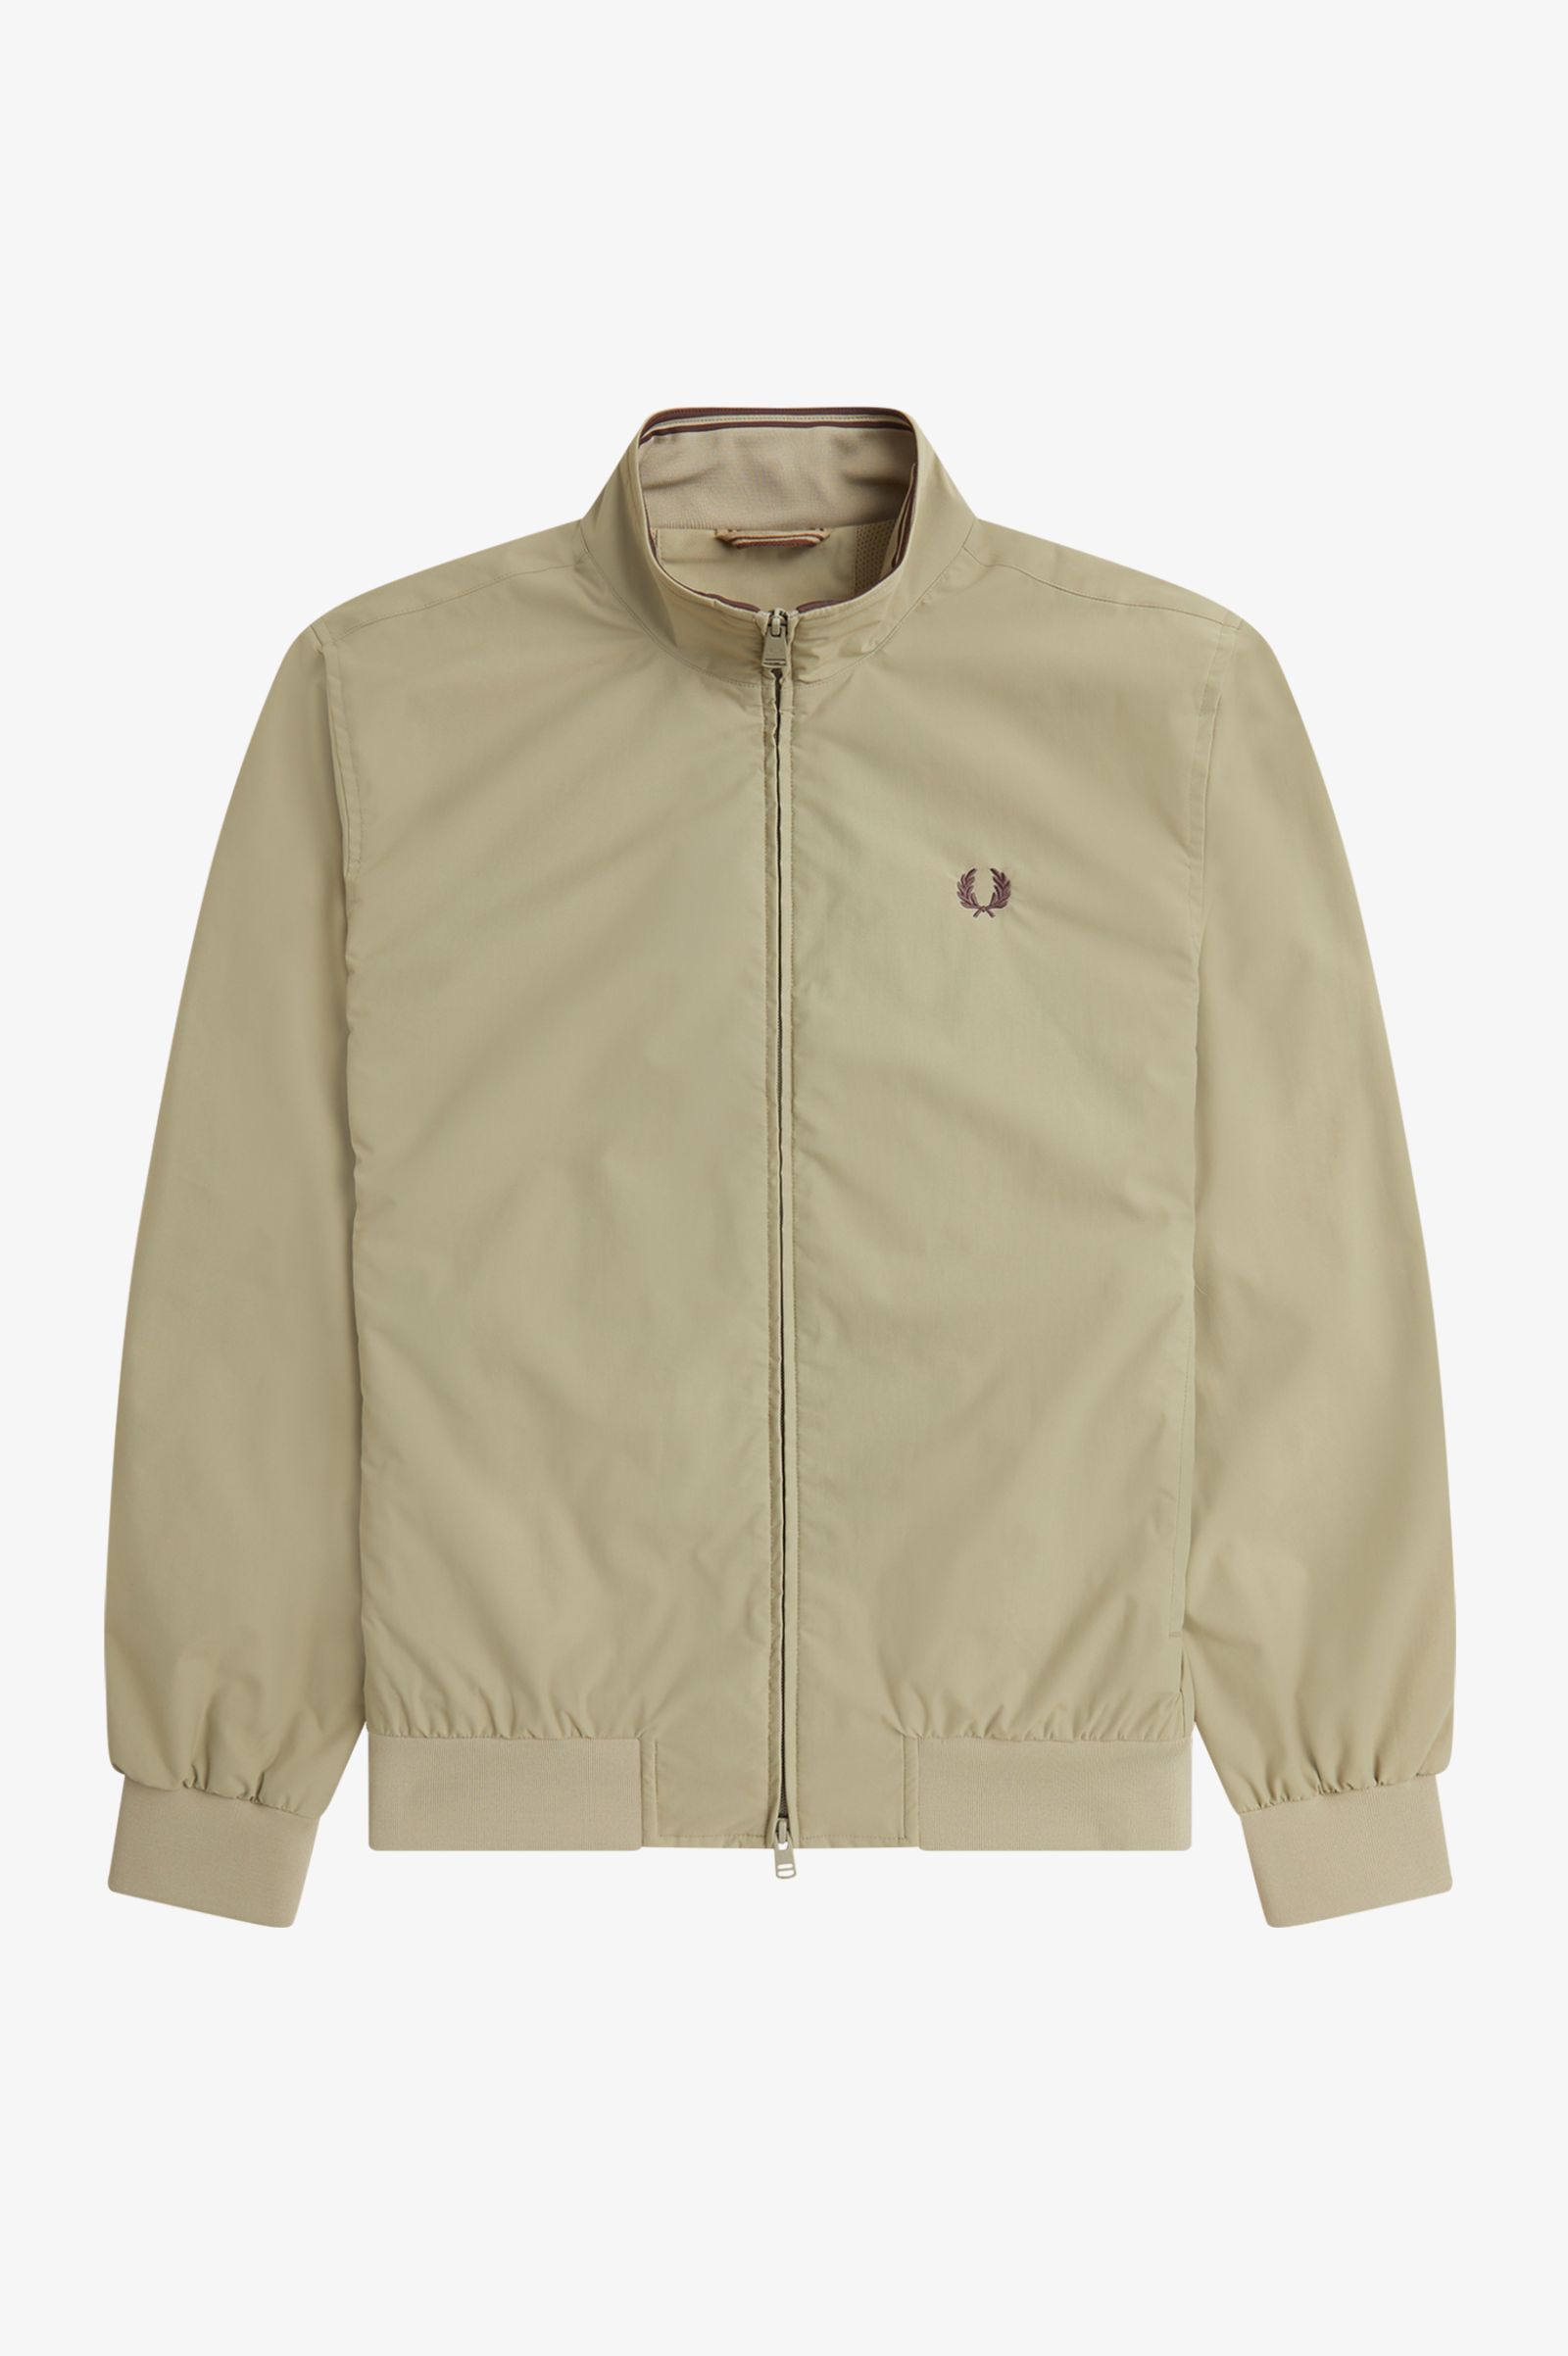 Fred Perry Brentham Jacket in Warm Grey 